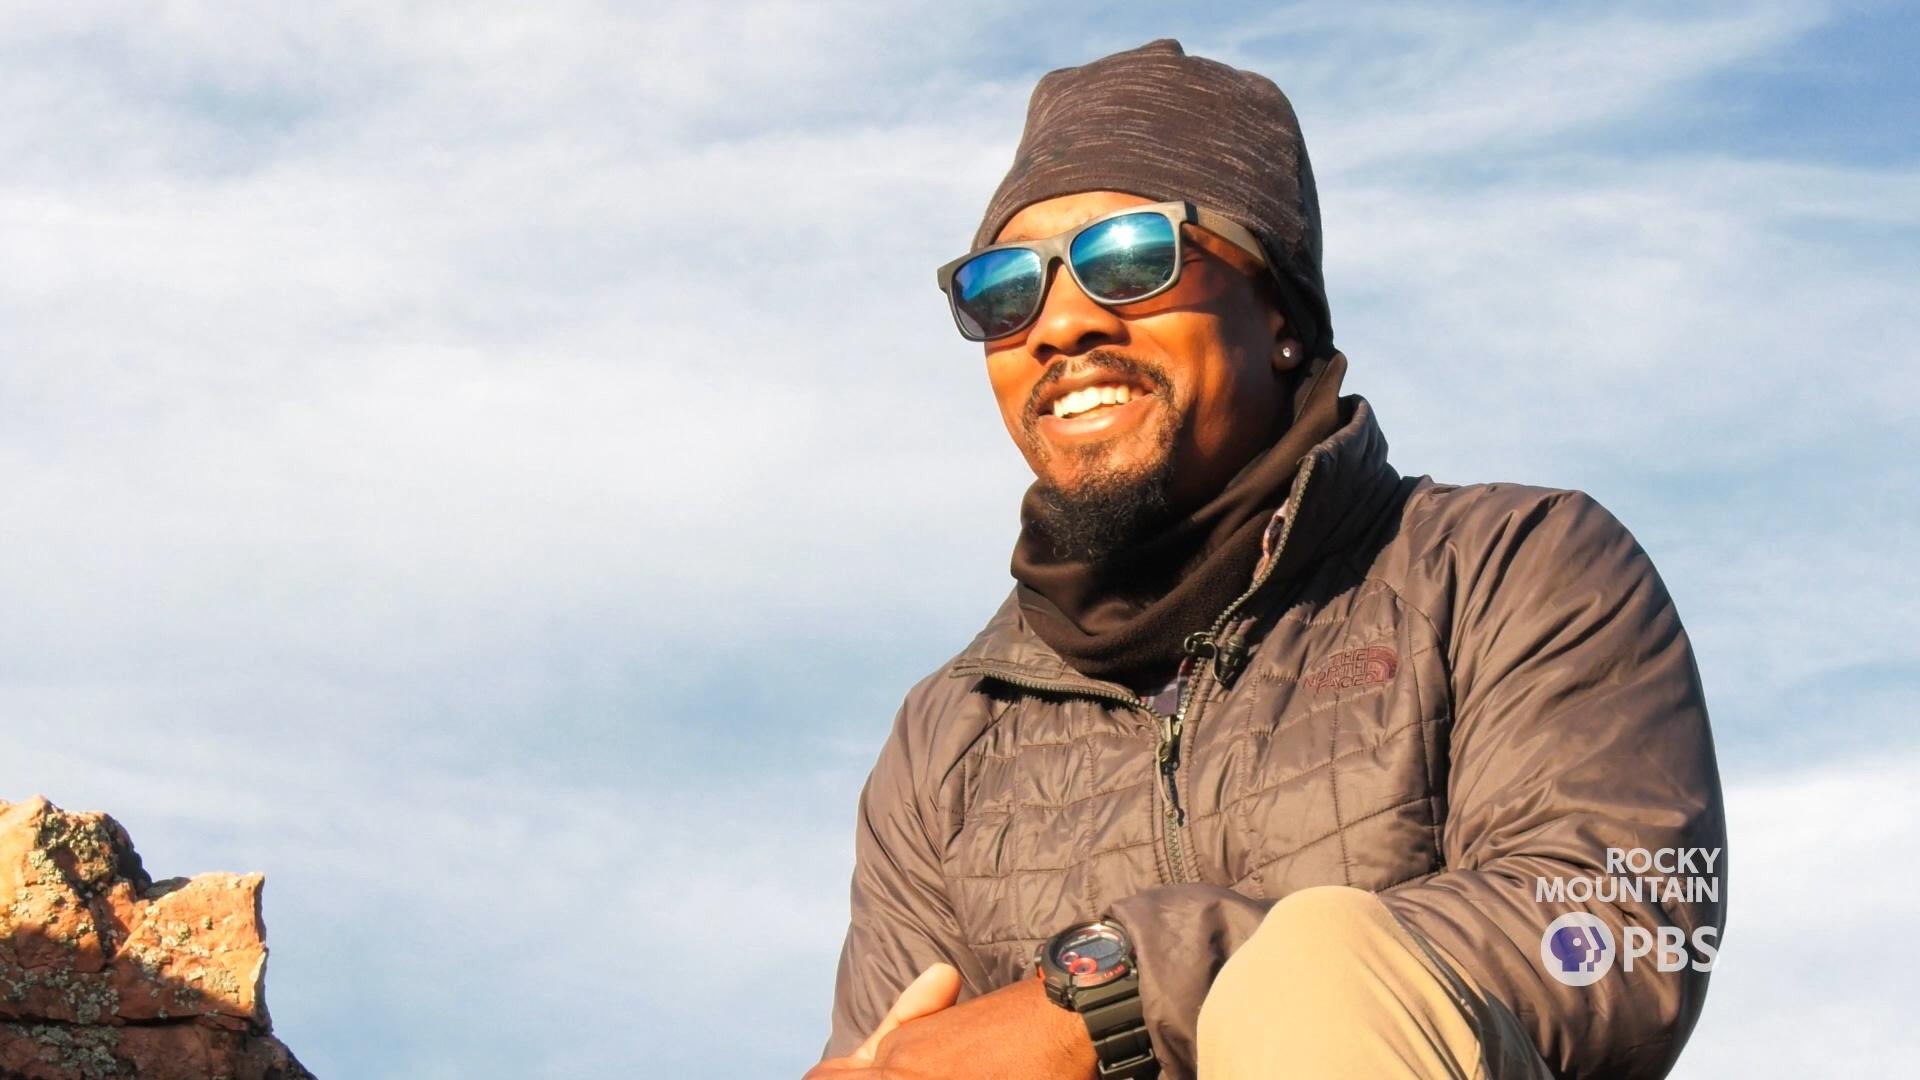 In September 2021, Evan Gill (aka The Black Sherpa) completed his goal of summiting every fourteener in Colorado.